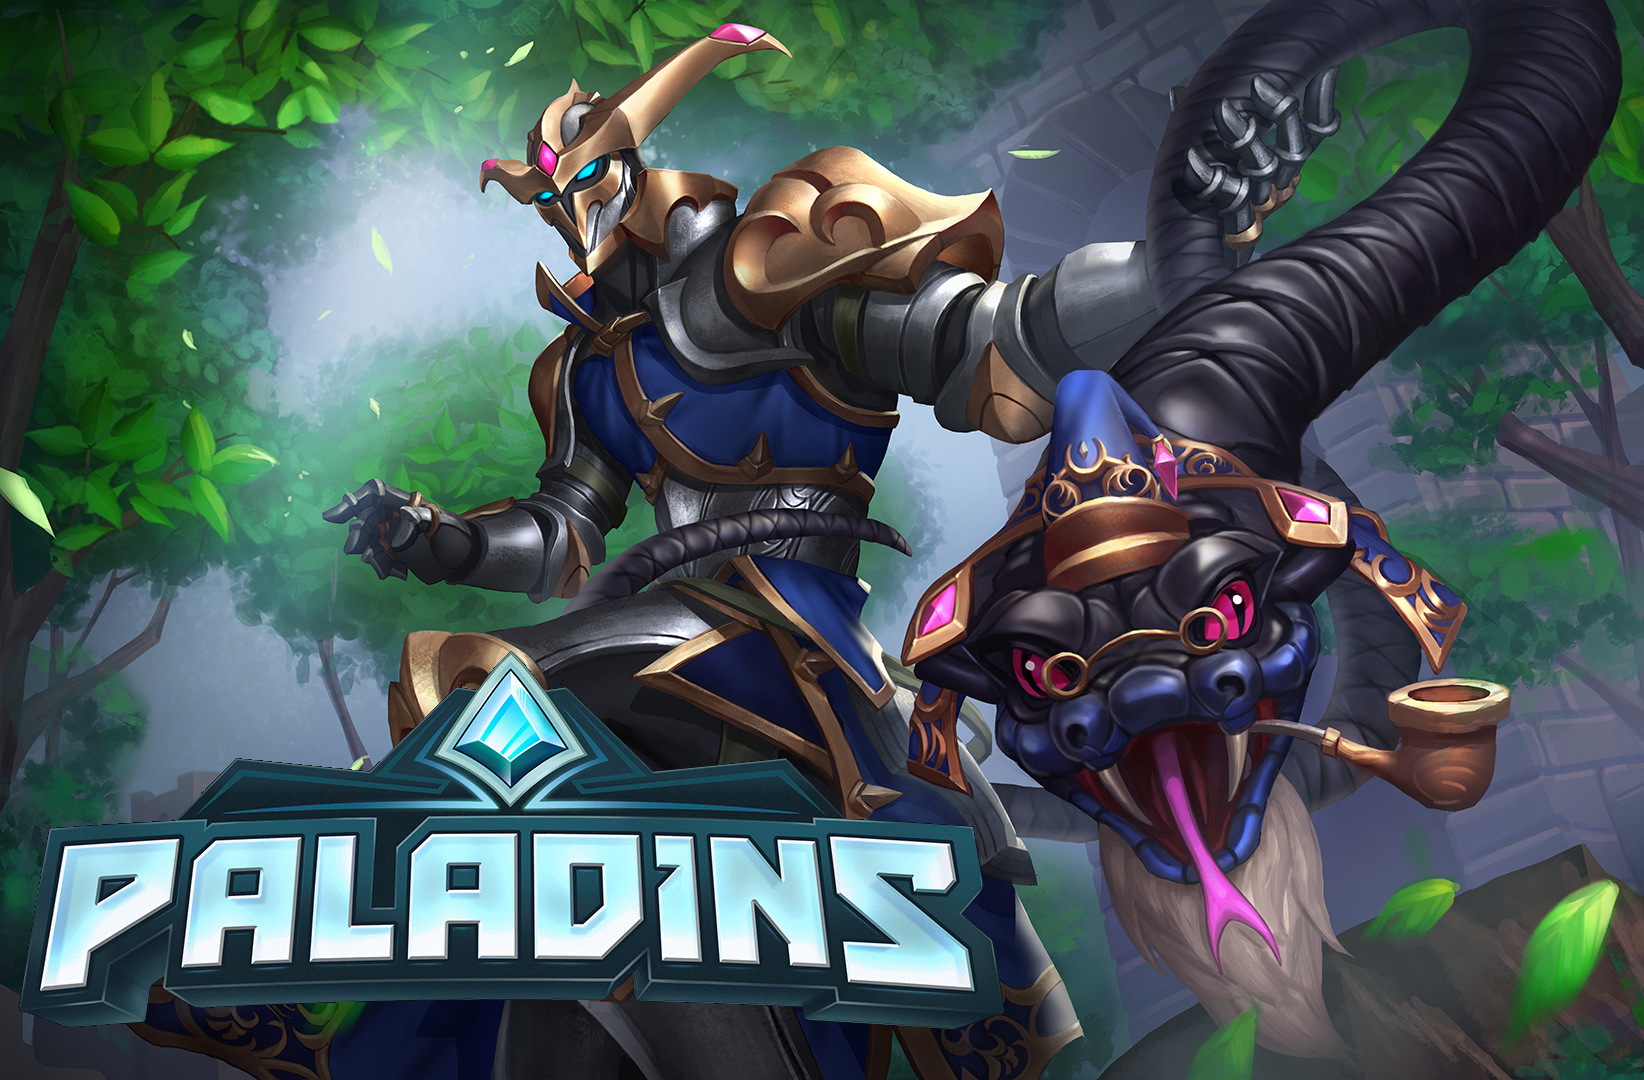 The upcoming Steel Forged update will bring a brand new Siege map to Paladins | Paladins Steel Forged update breakdown: battle pass, balancing, new Siege map Bazaar